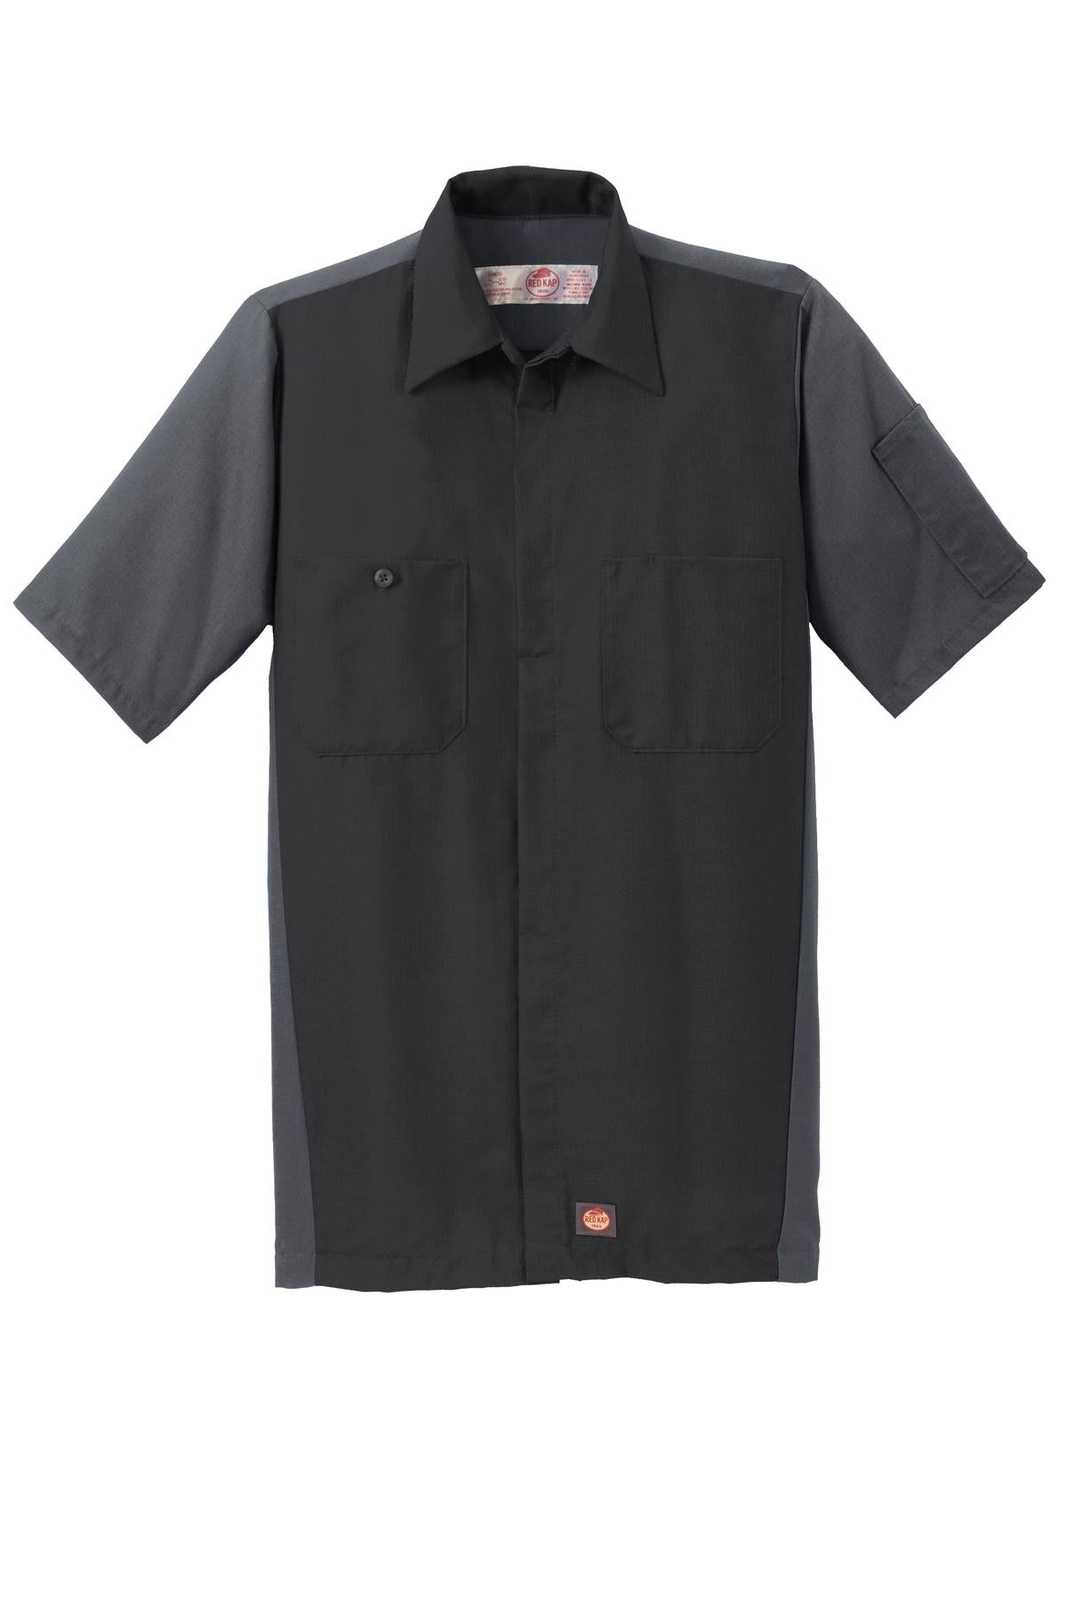 Red Kap SY20 Short Sleeve Ripstop Crew Shirt - Black/ Charcoal - HIT a Double - 3